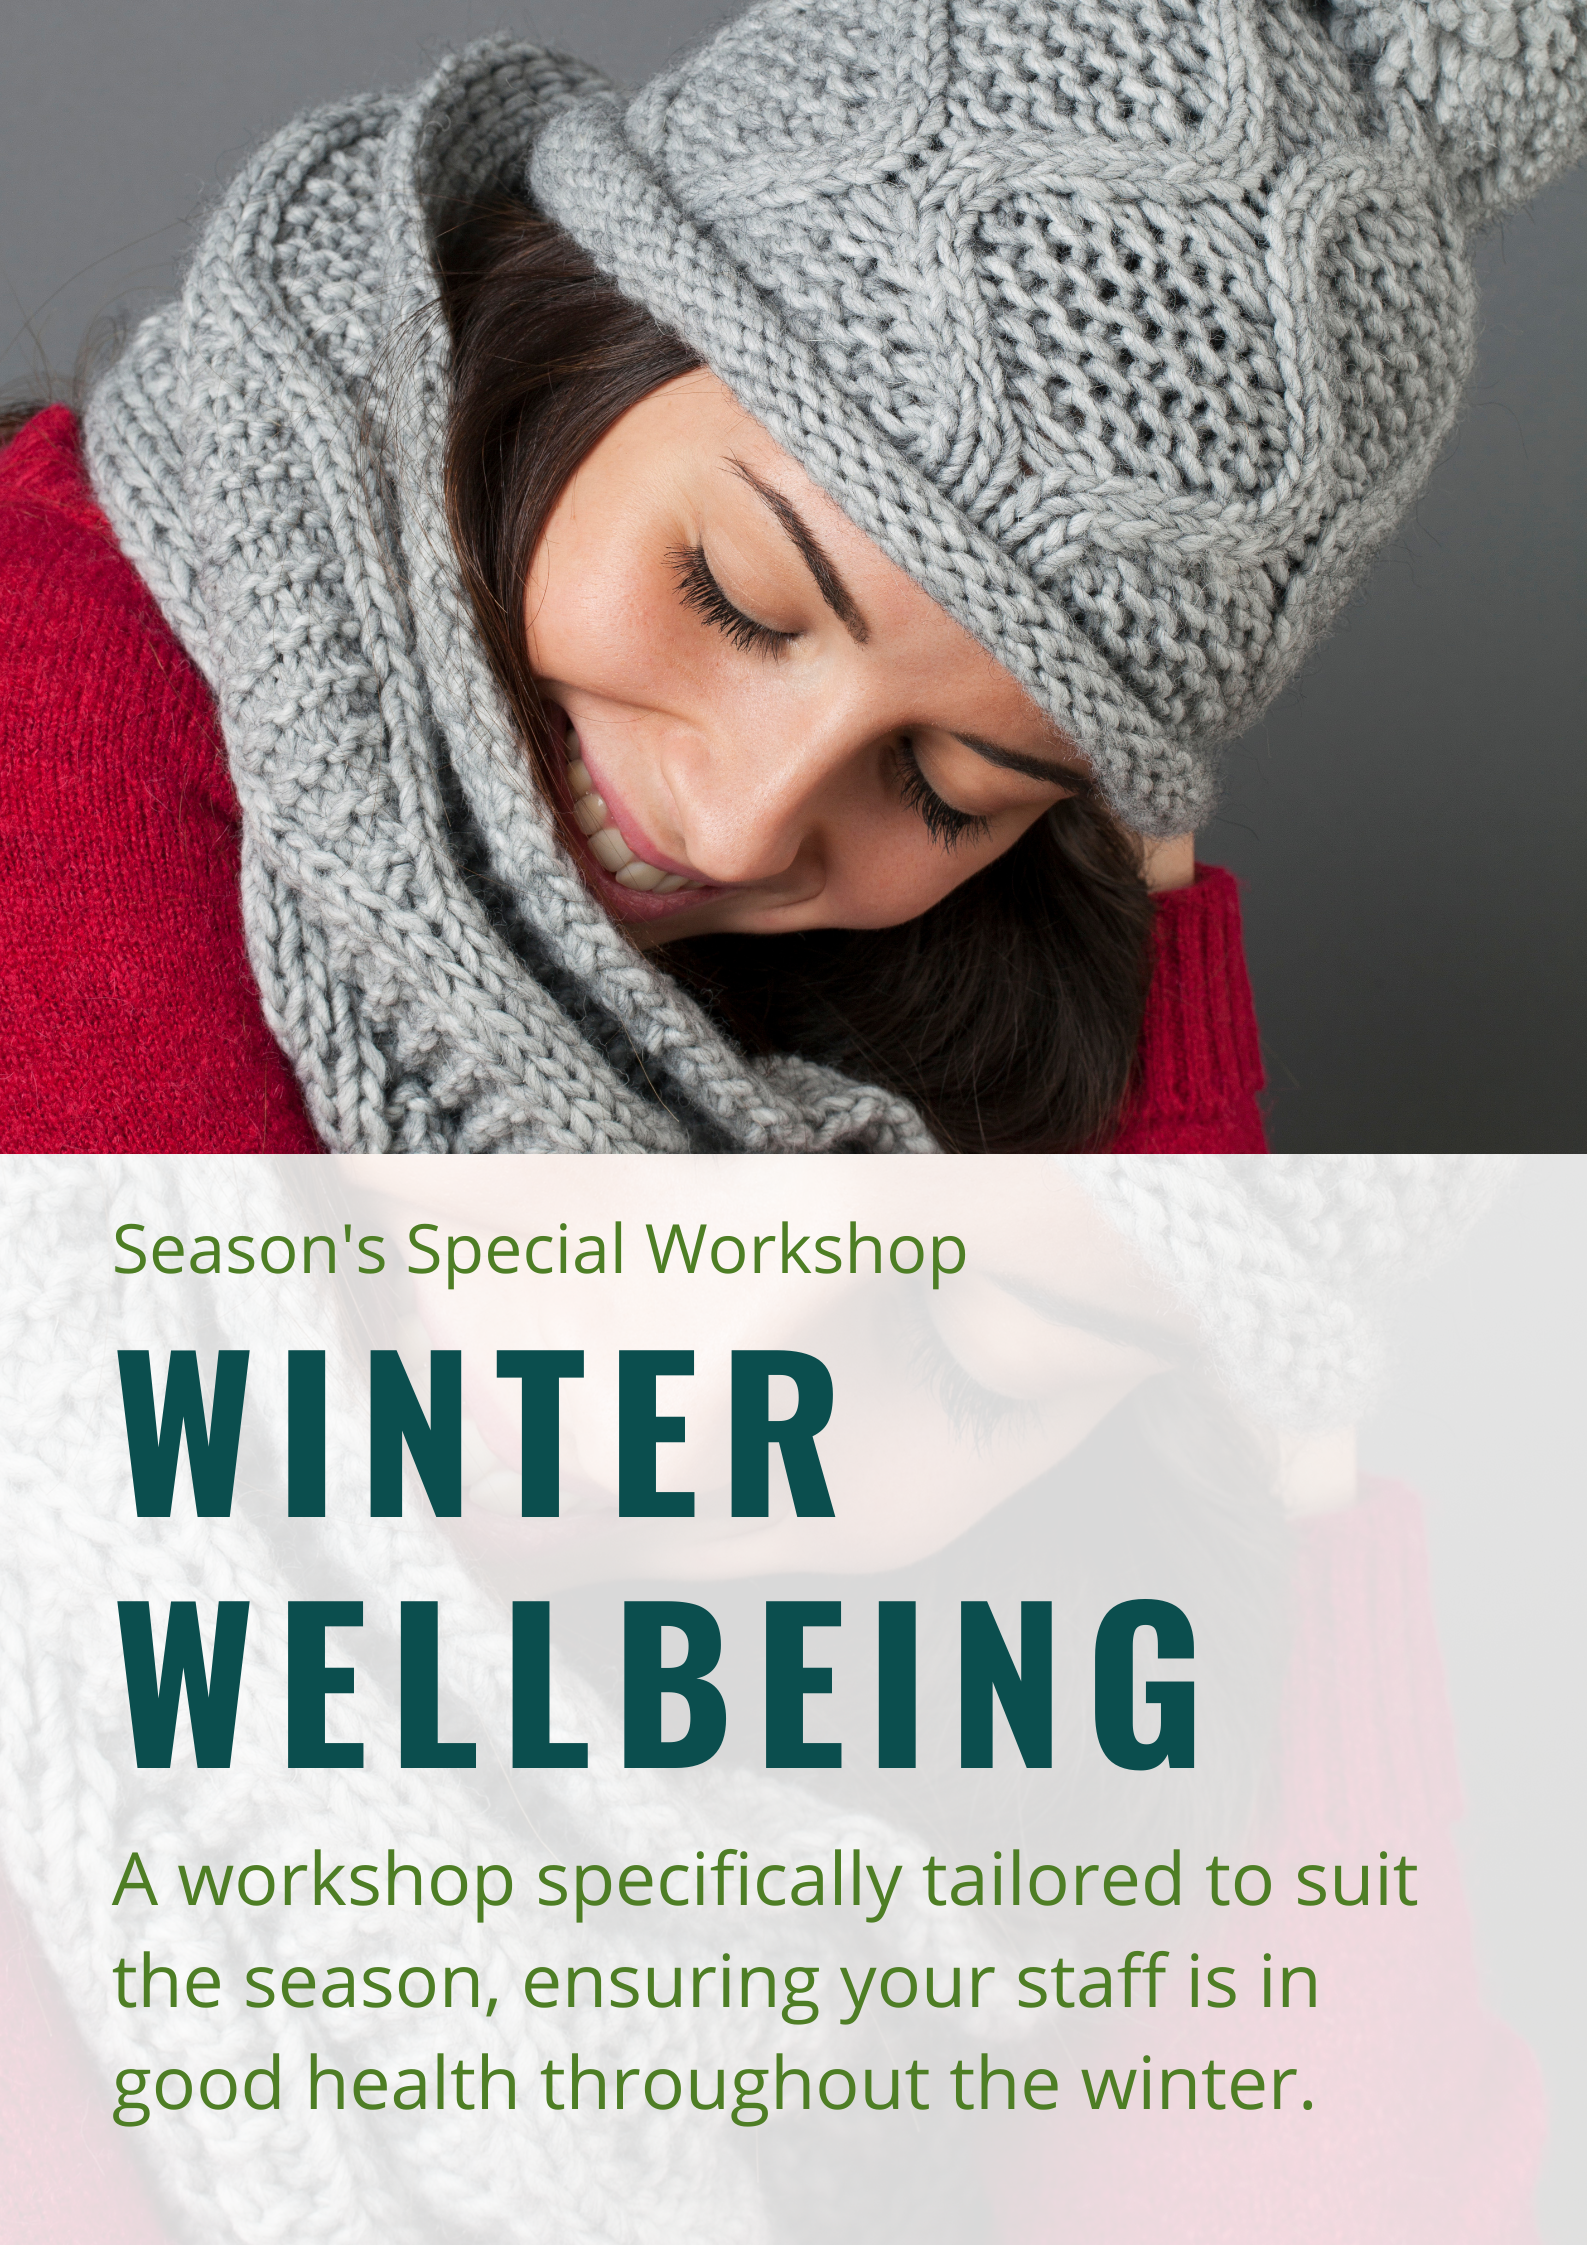 Winter Wellbeing. A workshop specifically tailored to suit the season, ensuring your staff is in good health throughout the winter.